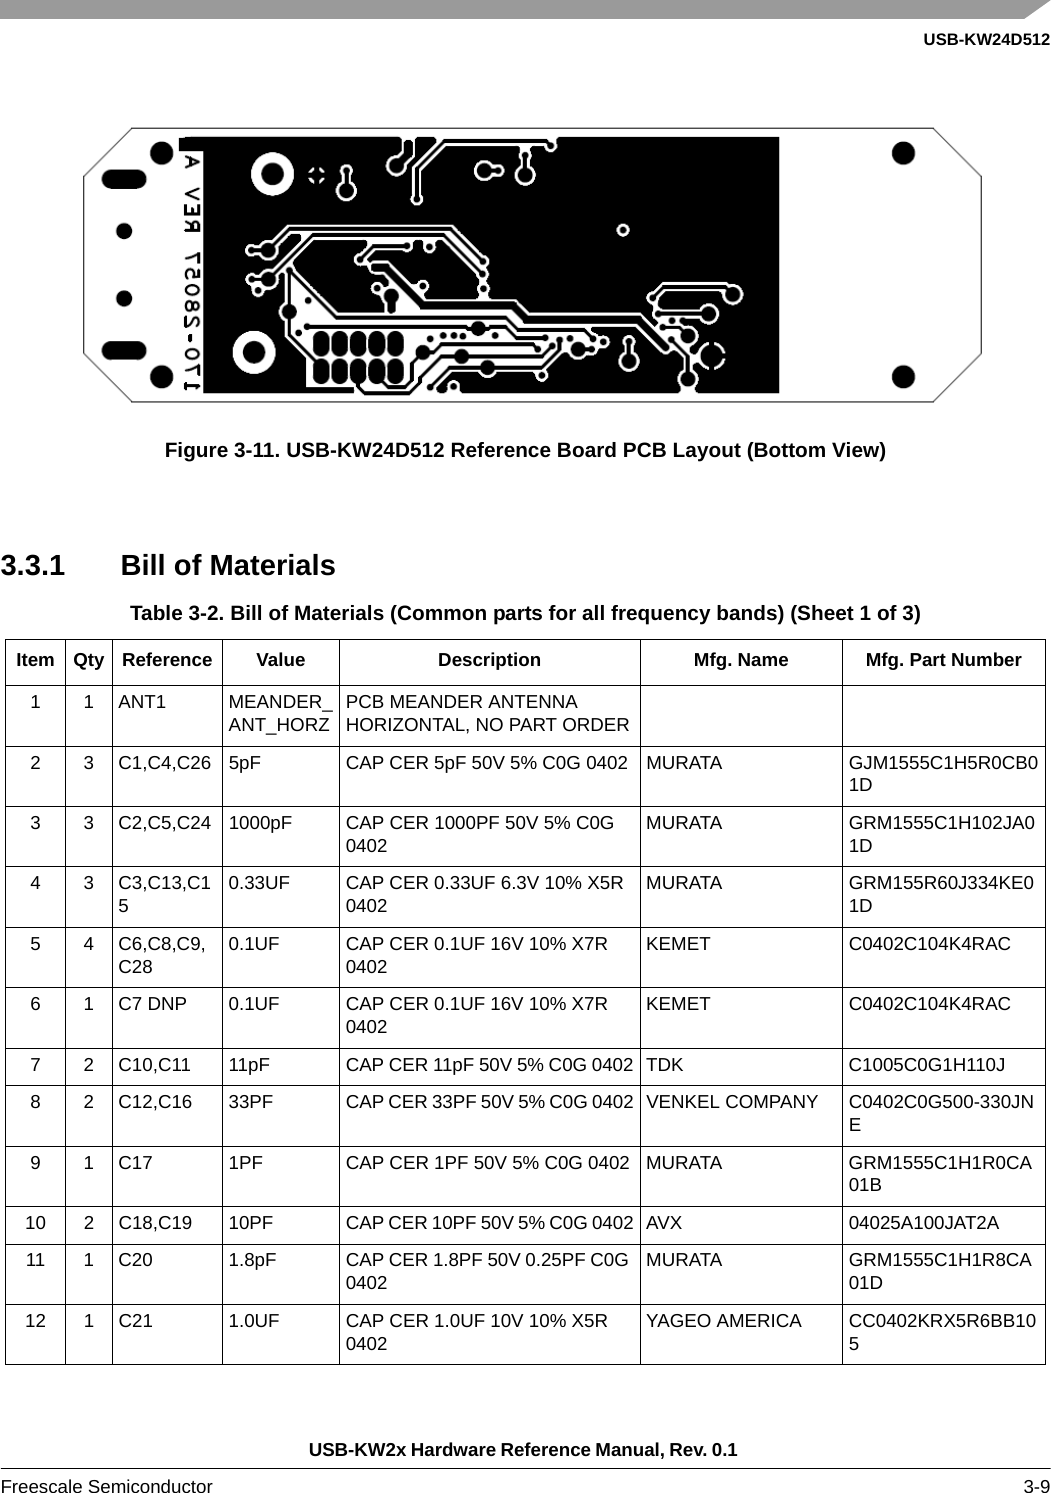 USB-KW24D512USB-KW2x Hardware Reference Manual, Rev. 0.1 Freescale Semiconductor 3-9Figure 3-11. USB-KW24D512 Reference Board PCB Layout (Bottom View)3.3.1 Bill of MaterialsTable 3-2. Bill of Materials (Common parts for all frequency bands) (Sheet 1 of 3)Item Qty Reference Value Description Mfg. Name Mfg. Part Number1 1 ANT1 MEANDER_ANT_HORZPCB MEANDER ANTENNA HORIZONTAL, NO PART ORDER2 3 C1,C4,C26 5pF CAP CER 5pF 50V 5% C0G 0402 MURATA GJM1555C1H5R0CB01D3 3 C2,C5,C24 1000pF CAP CER 1000PF 50V 5% C0G 0402MURATA GRM1555C1H102JA01D43C3,C13,C150.33UF CAP CER 0.33UF 6.3V 10% X5R 0402MURATA GRM155R60J334KE01D54C6,C8,C9,C280.1UF CAP CER 0.1UF 16V 10% X7R 0402KEMET C0402C104K4RAC6 1 C7 DNP 0.1UF CAP CER 0.1UF 16V 10% X7R 0402KEMET C0402C104K4RAC7 2 C10,C11 11pF CAP CER 11pF 50V 5% C0G 0402 TDK C1005C0G1H110J8 2 C12,C16 33PF CAP CER 33PF 50V 5% C0G 0402 VENKEL COMPANY C0402C0G500-330JNE9 1 C17 1PF CAP CER 1PF 50V 5% C0G 0402 MURATA GRM1555C1H1R0CA01B10 2 C18,C19 10PF CAP CER 10PF 50V 5% C0G 0402 AVX 04025A100JAT2A11 1 C20 1.8pF CAP CER 1.8PF 50V 0.25PF C0G 0402MURATA GRM1555C1H1R8CA01D12 1 C21 1.0UF CAP CER 1.0UF 10V 10% X5R 0402YAGEO AMERICA CC0402KRX5R6BB105